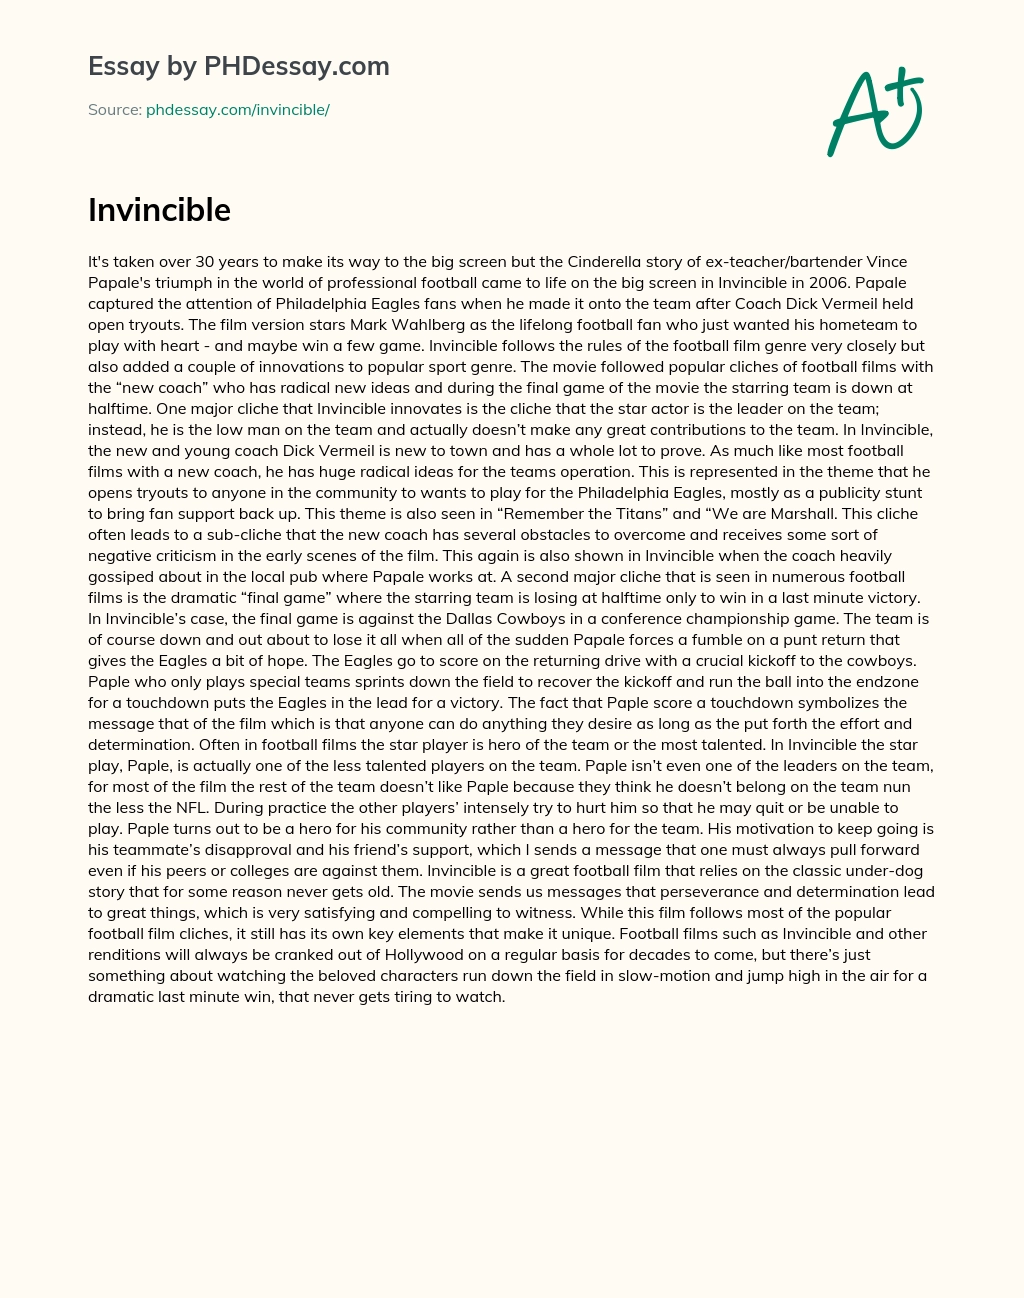 Invincible: The Cinderella Story of Vince Papale’s Football Triumph essay